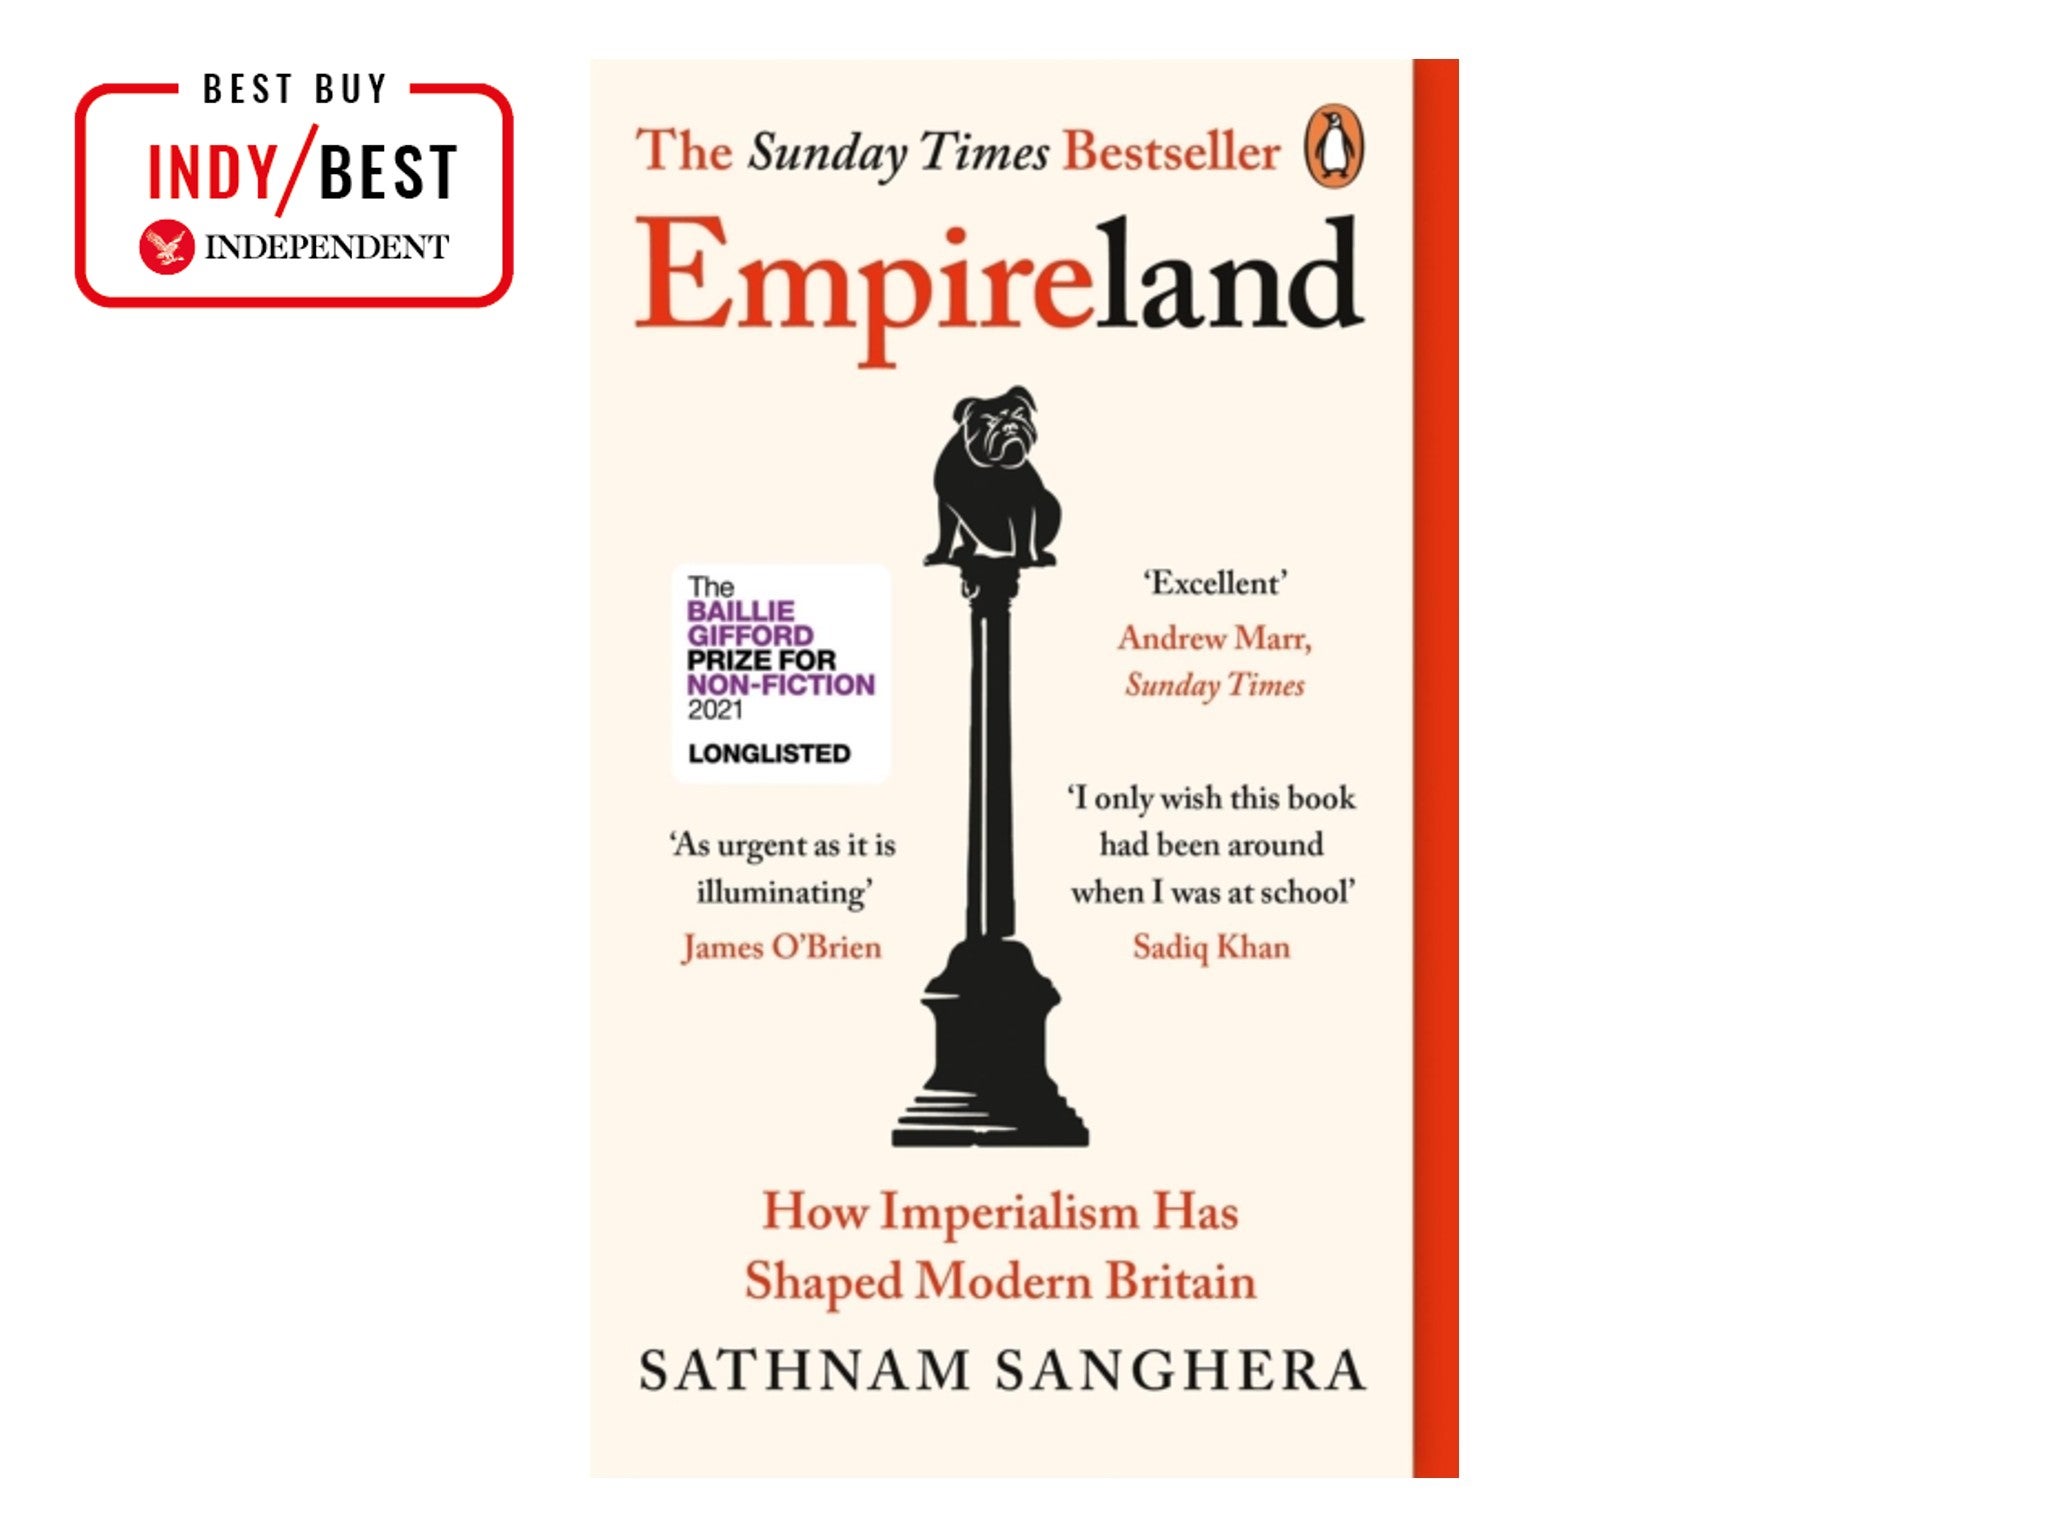 ‘Empireland- How Imperialism Has Shaped Modern Britain’ by Sathnam Sanghera, published by Penguin indybest.jpg